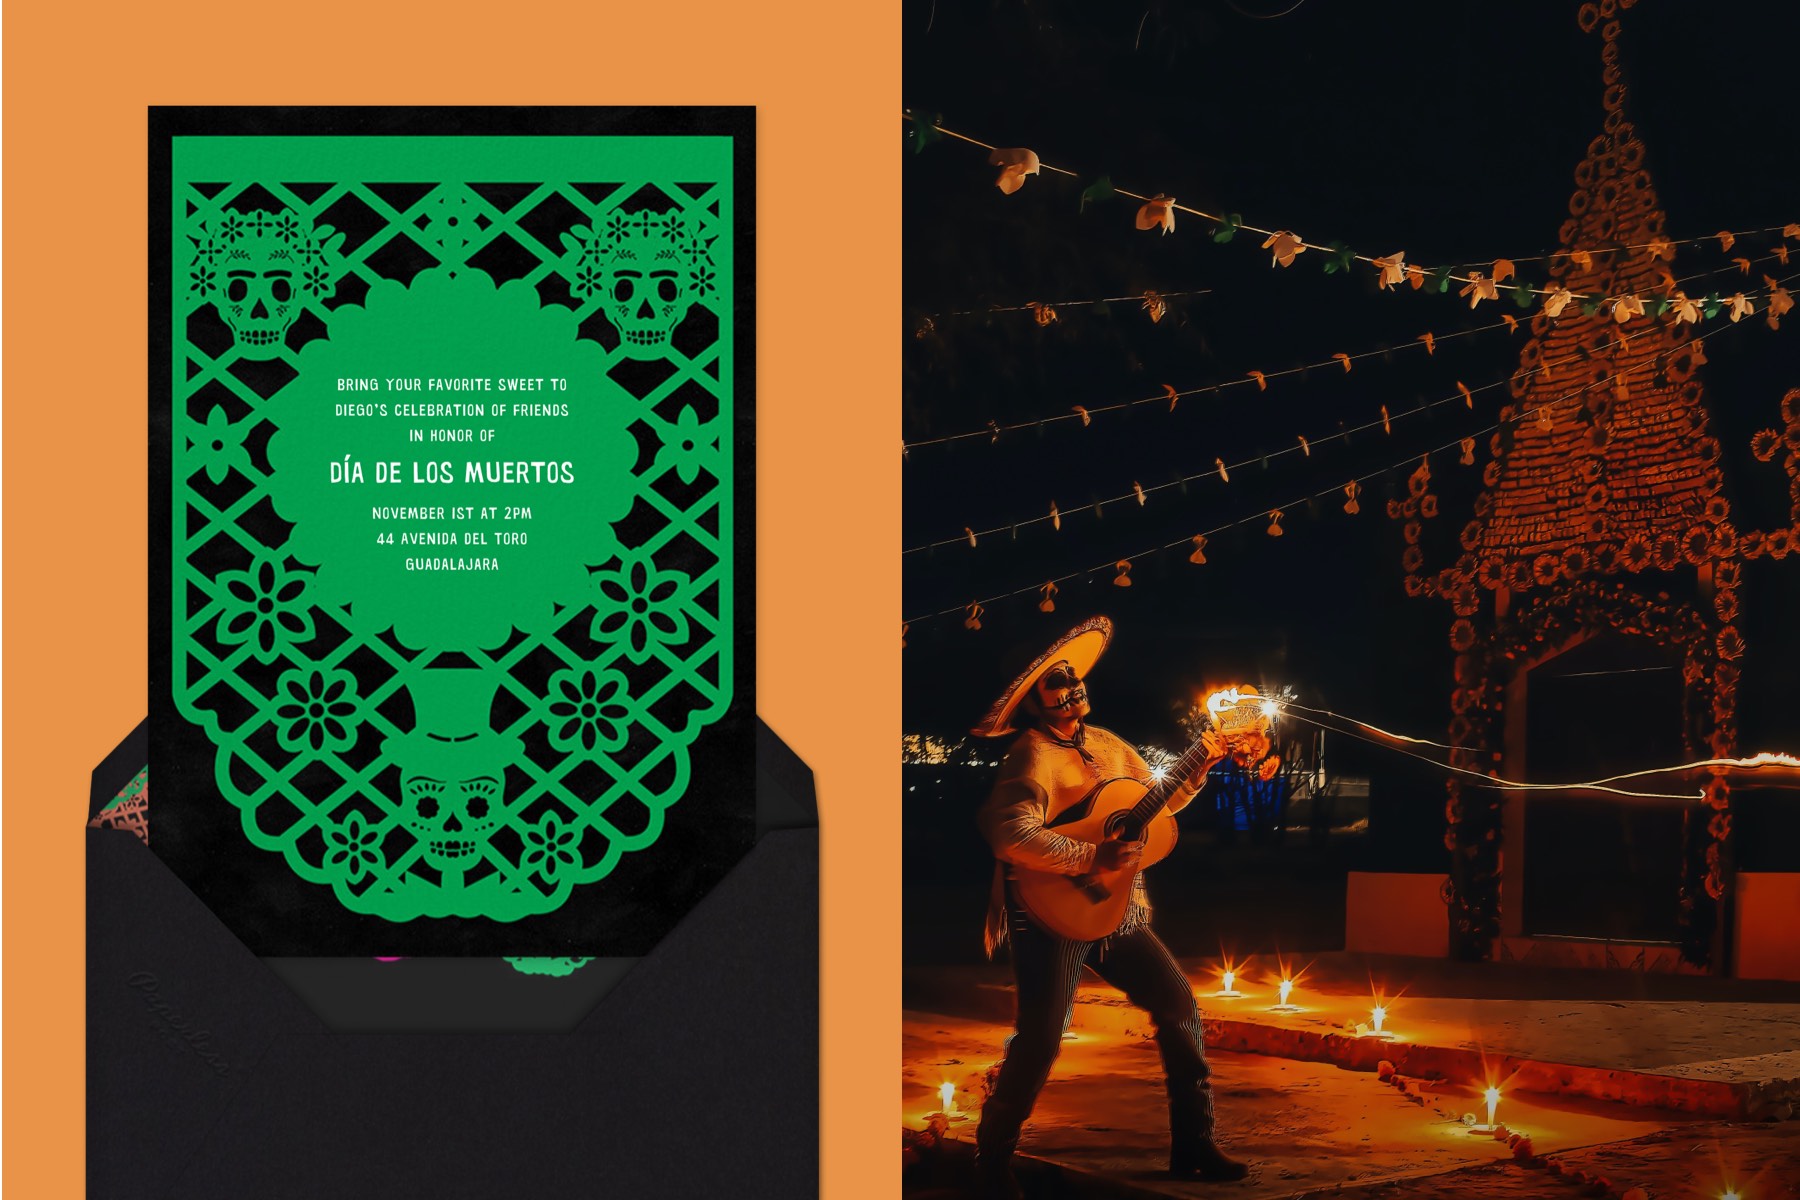 Left: A green and black, papel picado-inspired card. Right: A person wearing sugar skull face paint plays the guitar at night.